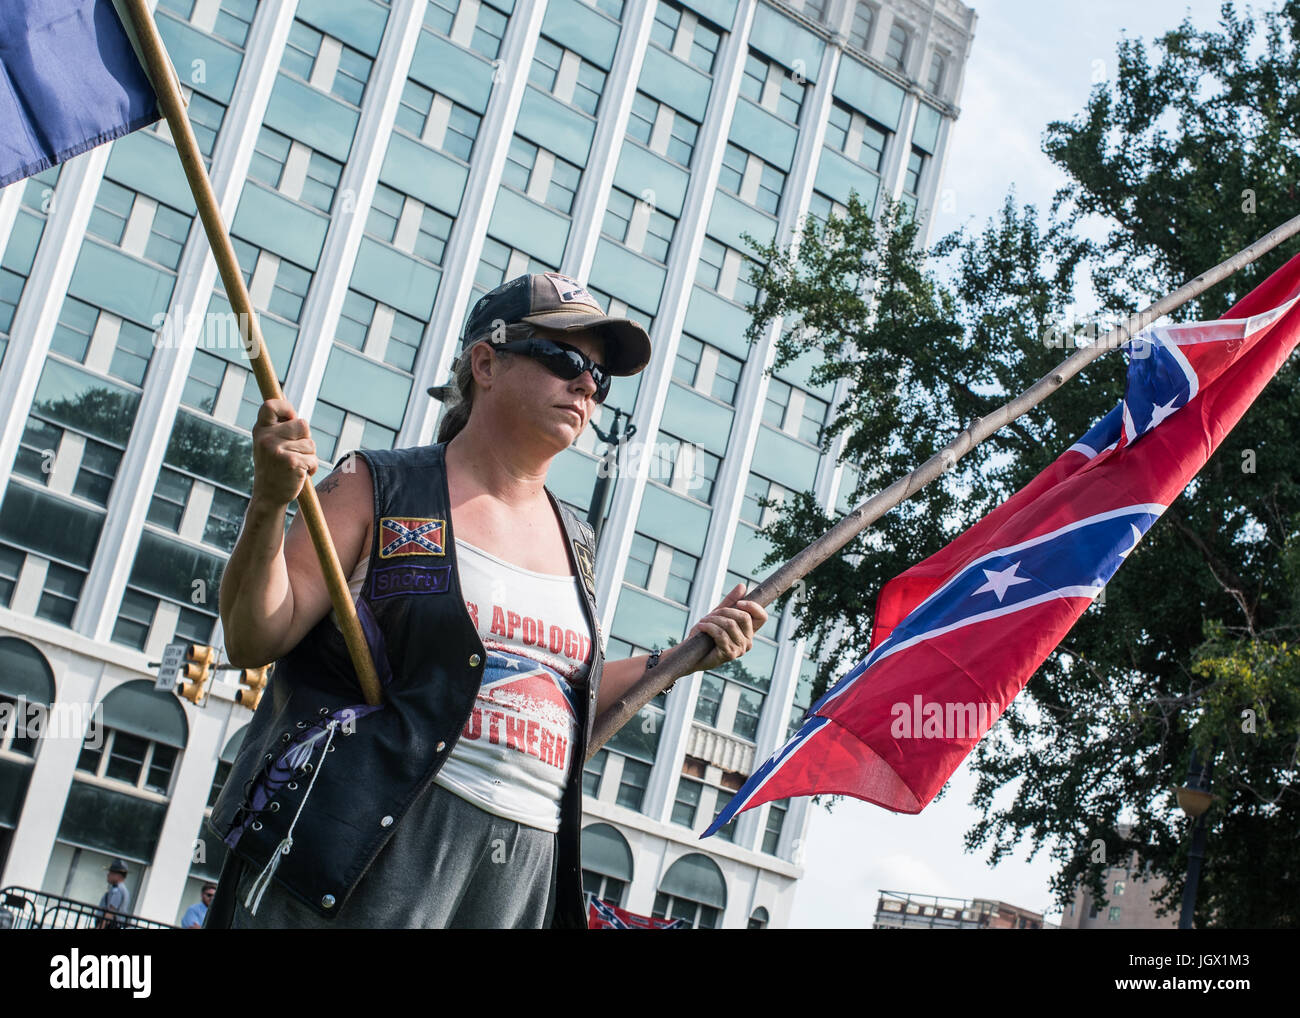 Colombia, South Carolina, USA. 10th Jul, 2017. A few dozen of Confederacy supporters displayed their loyalty to the Confederate flag during the Confederate flag raising event held by the South Carolina Secessionist Party in protest of the two year anniversary of the Confederate Battle Flag's removal from the South Carolina State House Grounds in 2015. The flag which was hoisted on a portable flag pole at 10 a.m. was to be removed from the South Carolina State House Grounds at 5 p.m. Credit: Crush Rush/Alamy Live News Stock Photo